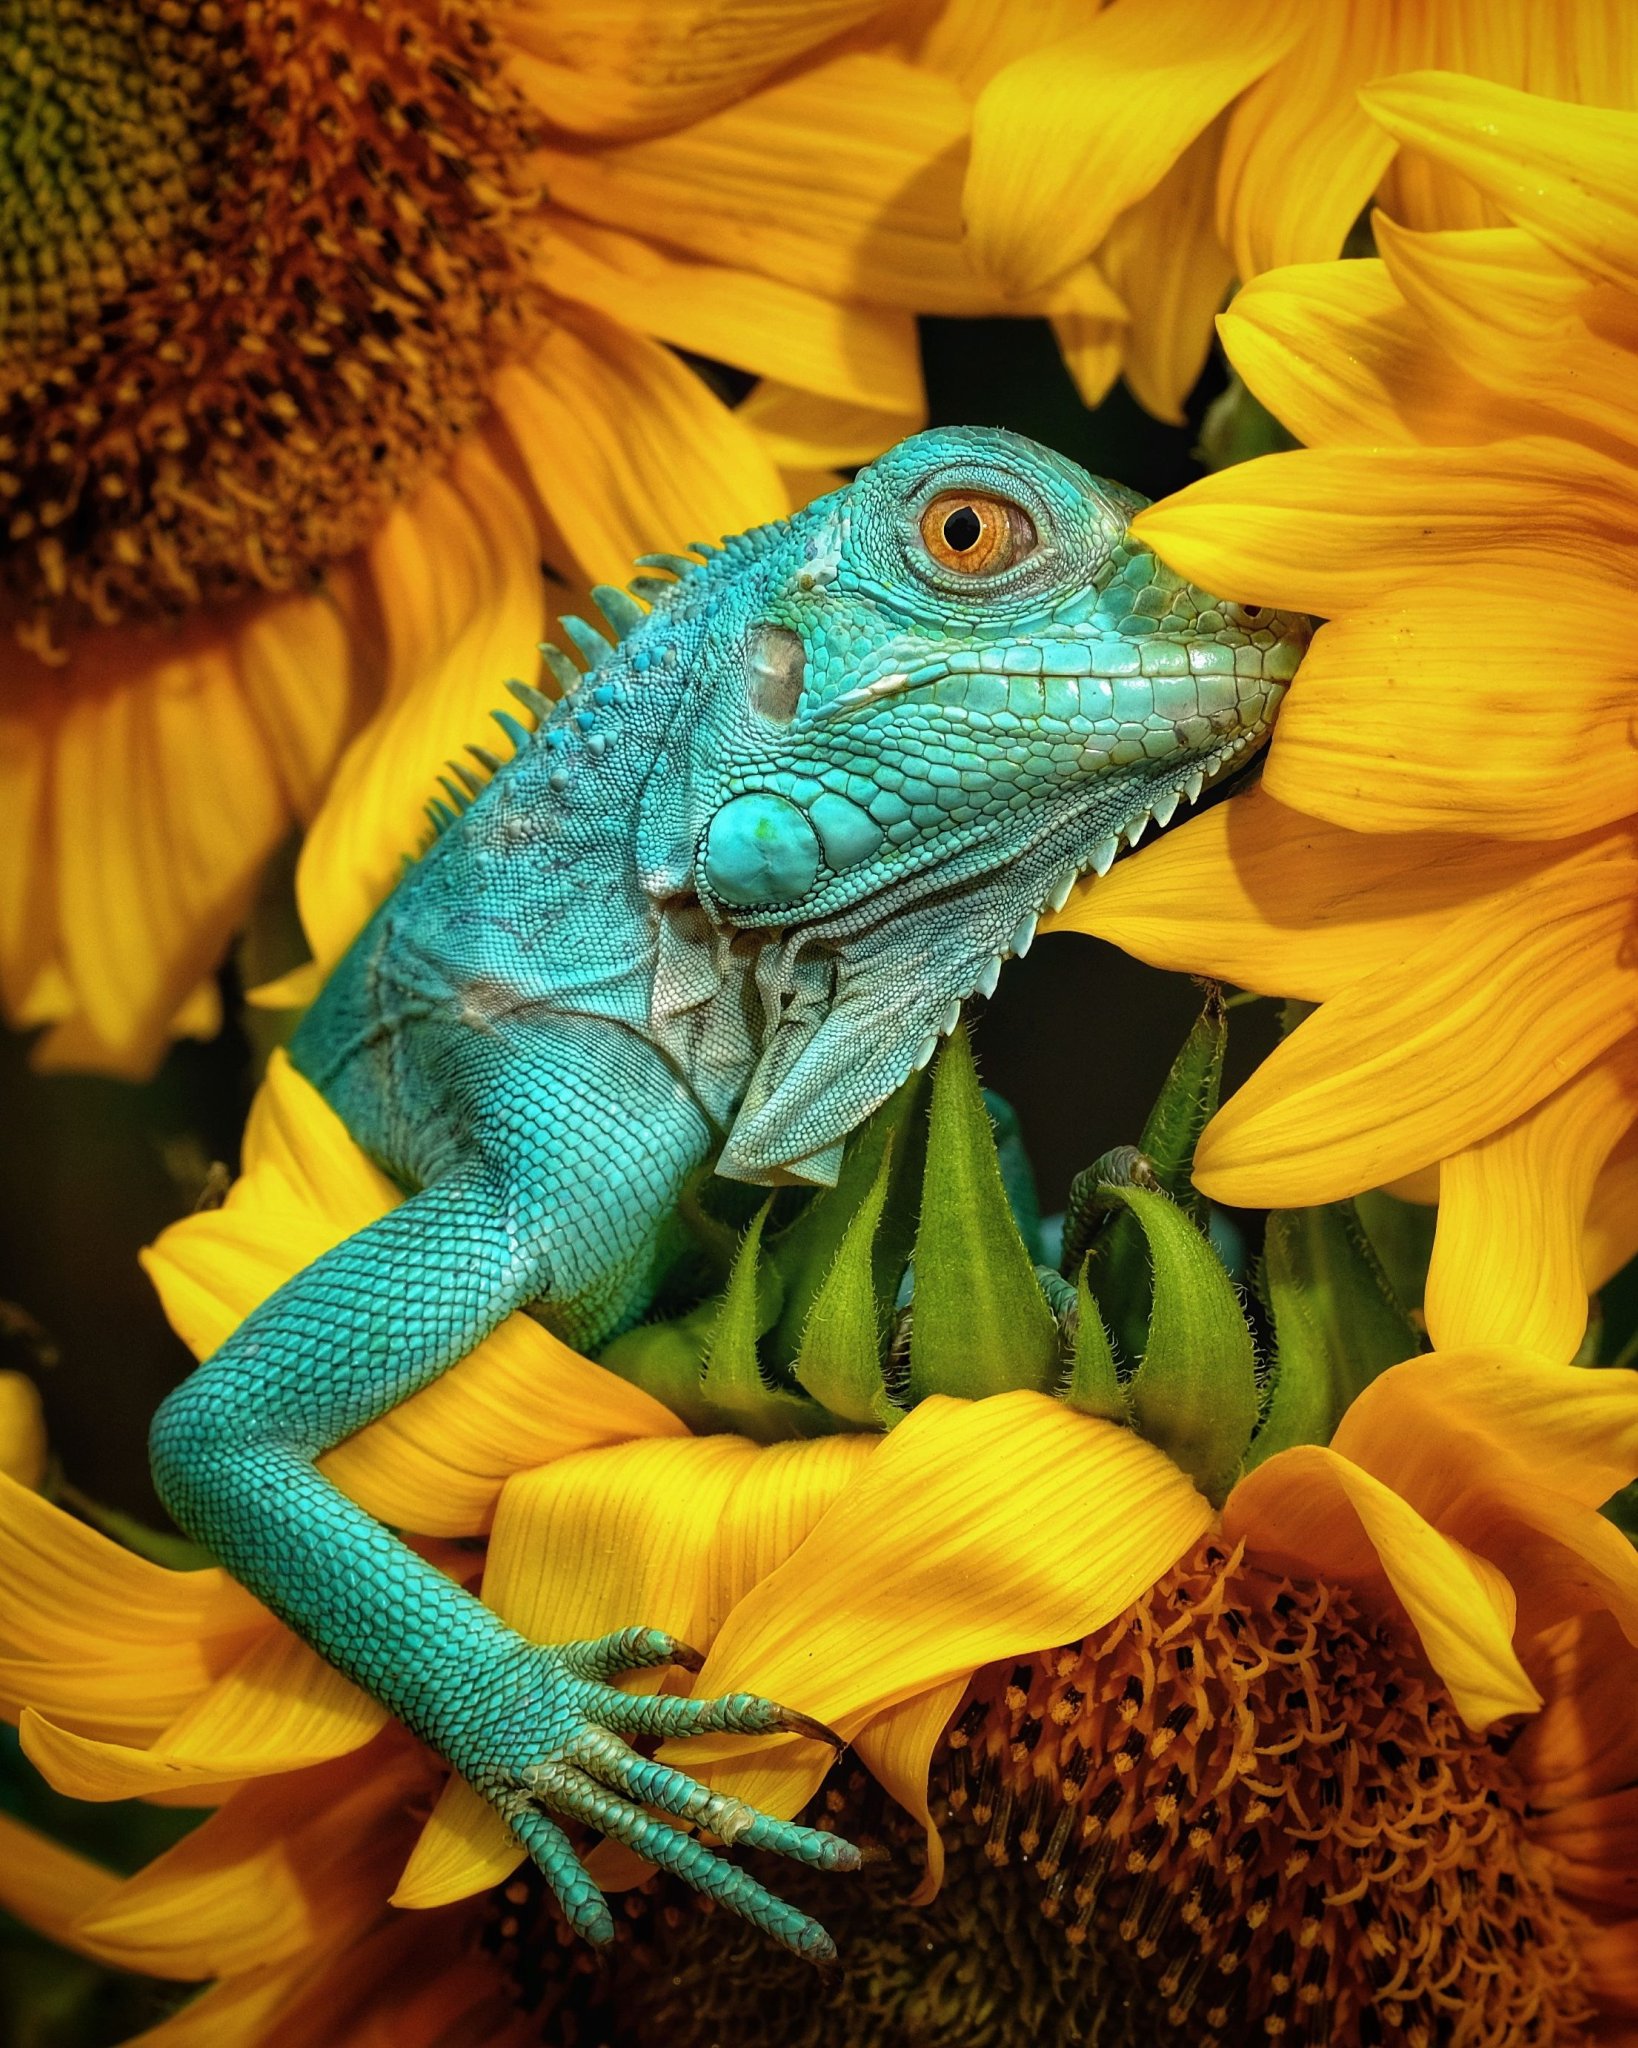 Here are 15 of the best animal photos from 2020